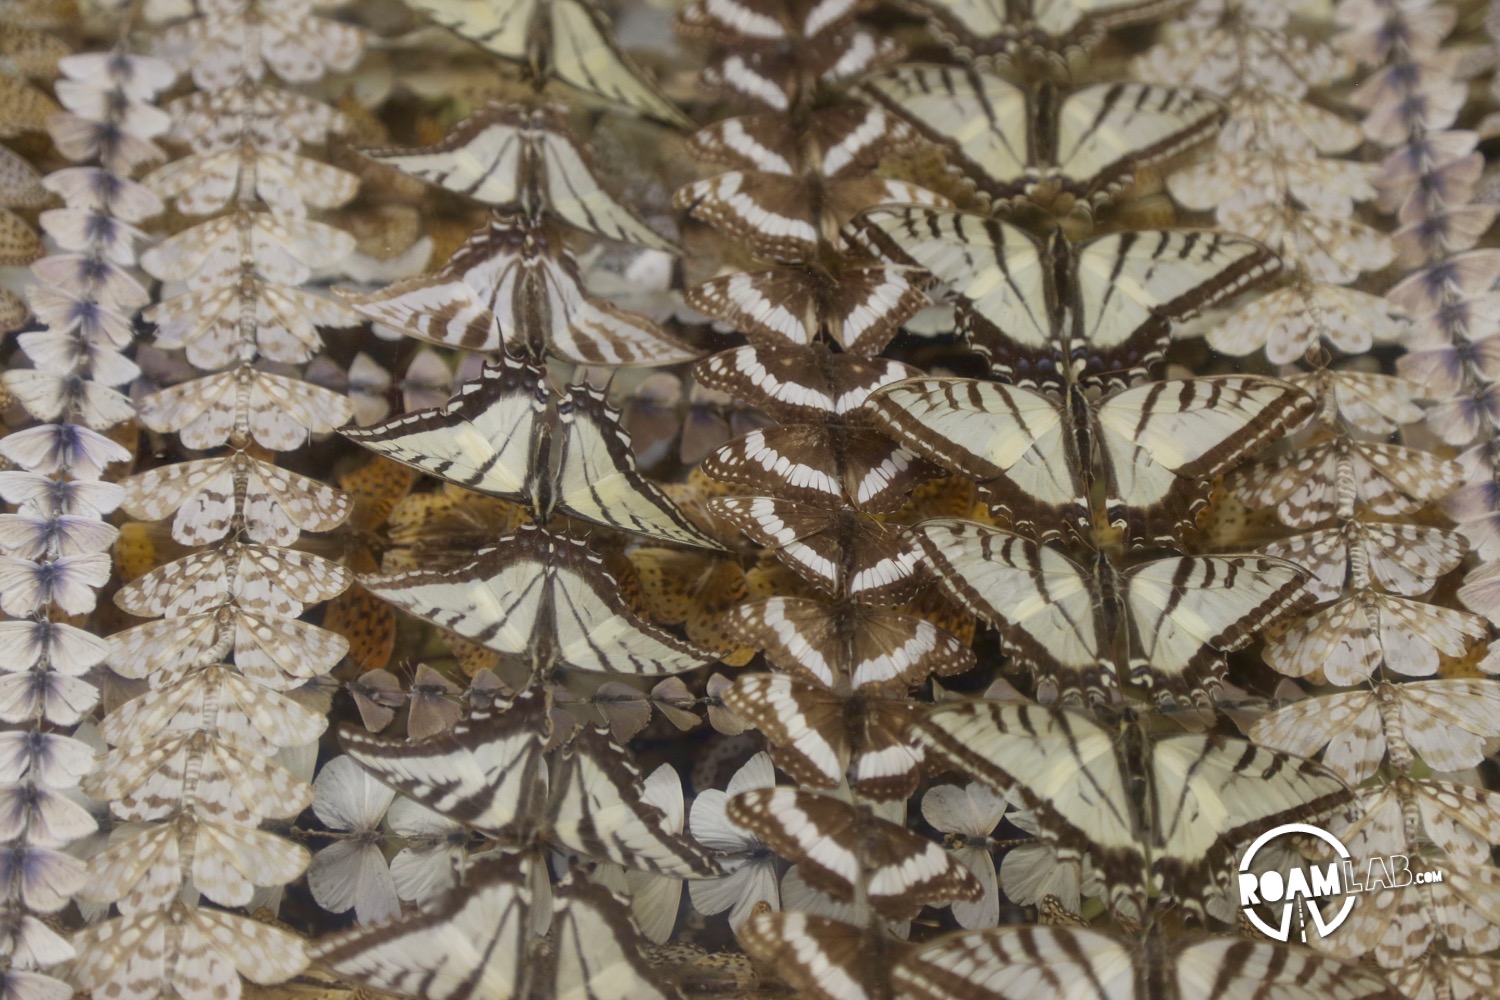 There is something profoundly Victorian about butterfly collecting. This abundance of Virginia City butterflies was collected by Sam and George Harriman and displayed in the Thompson-Hickman Museum